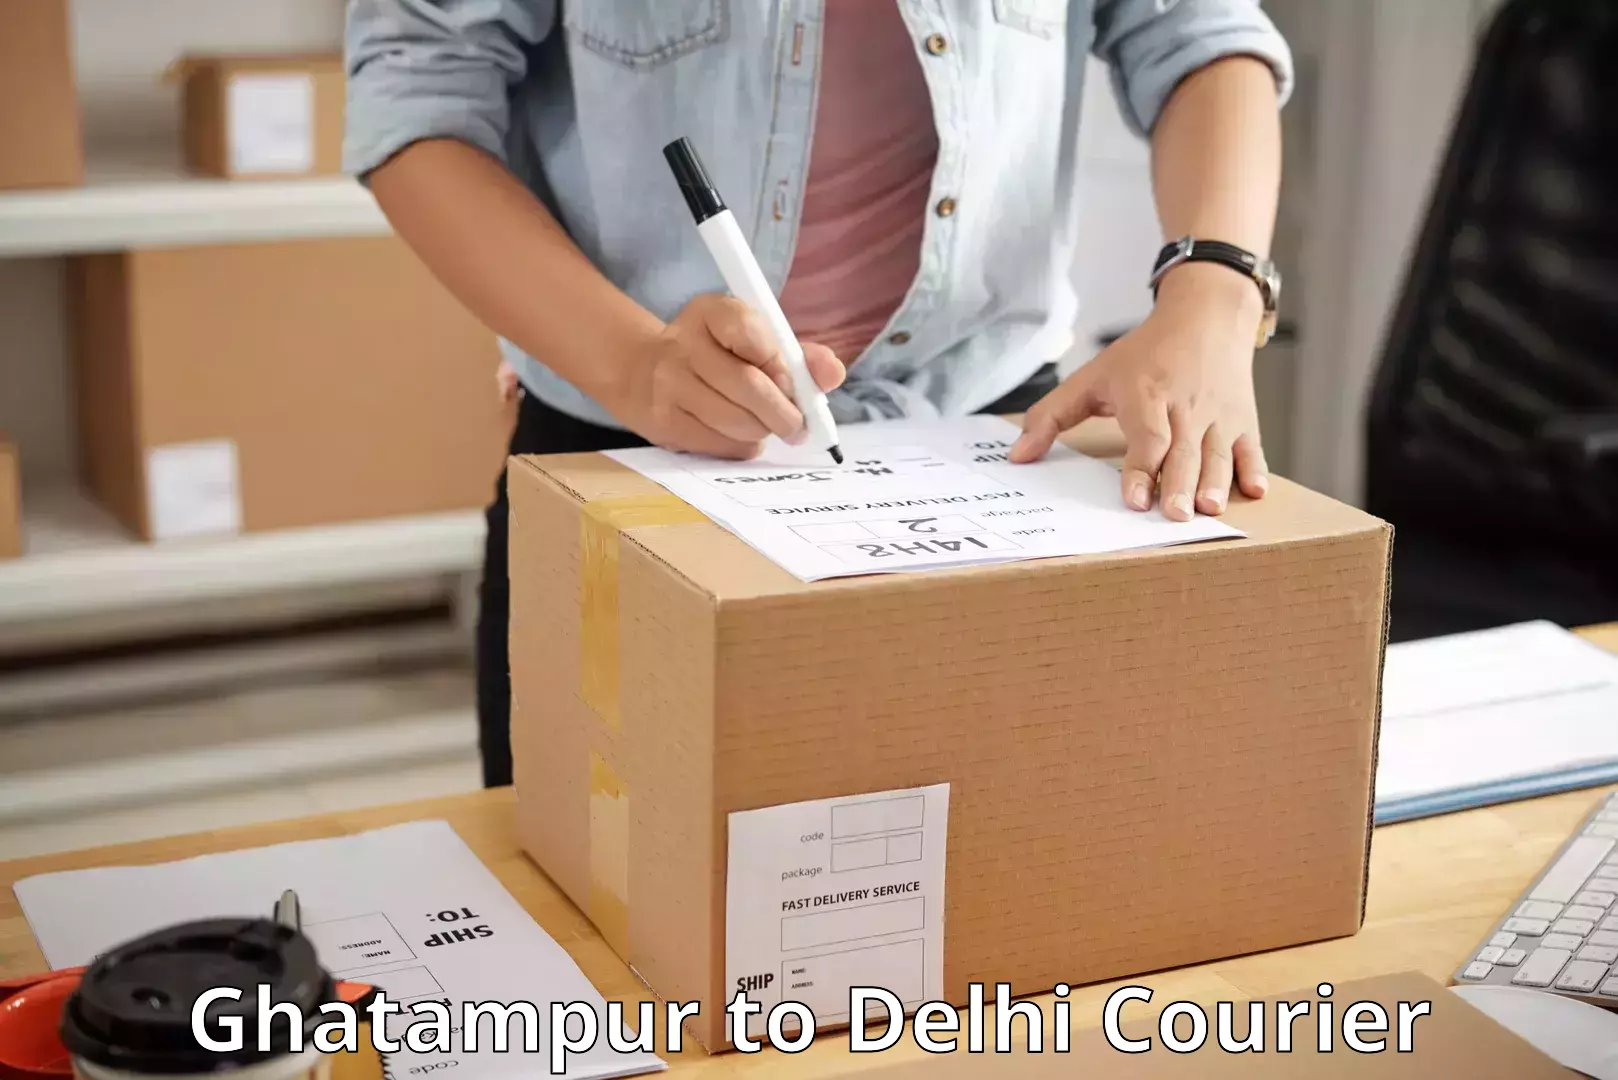 Delivery service partnership Ghatampur to University of Delhi